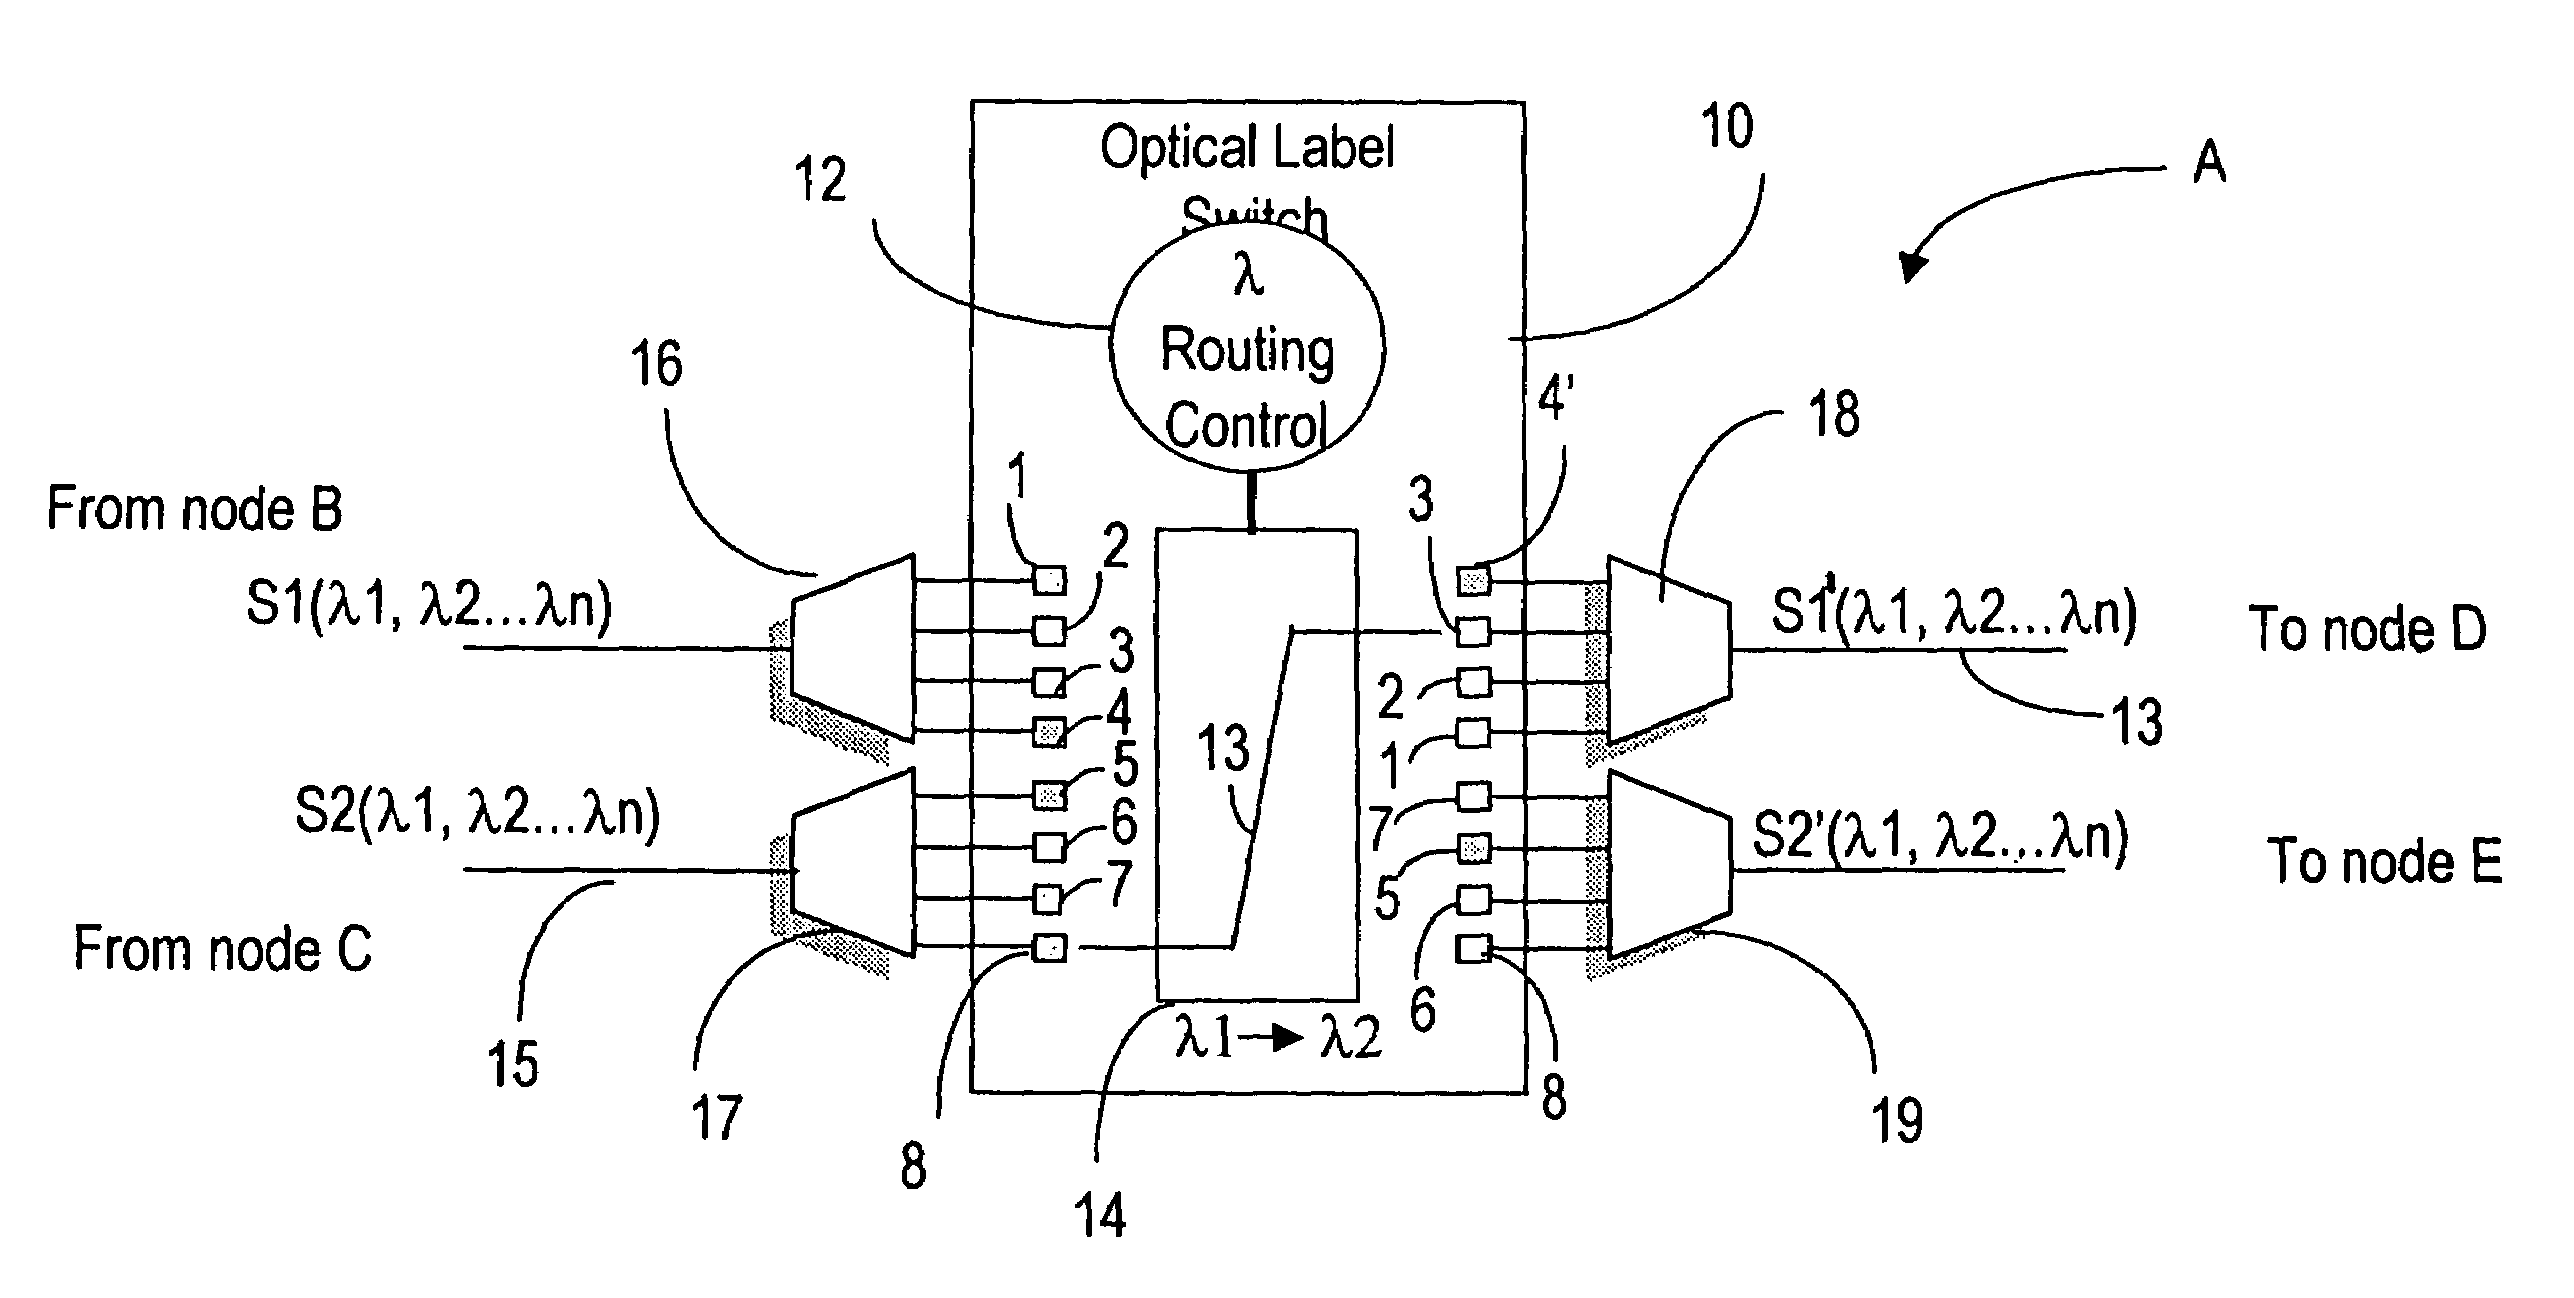 MPLS application to optical cross-connect using wavelength as a label